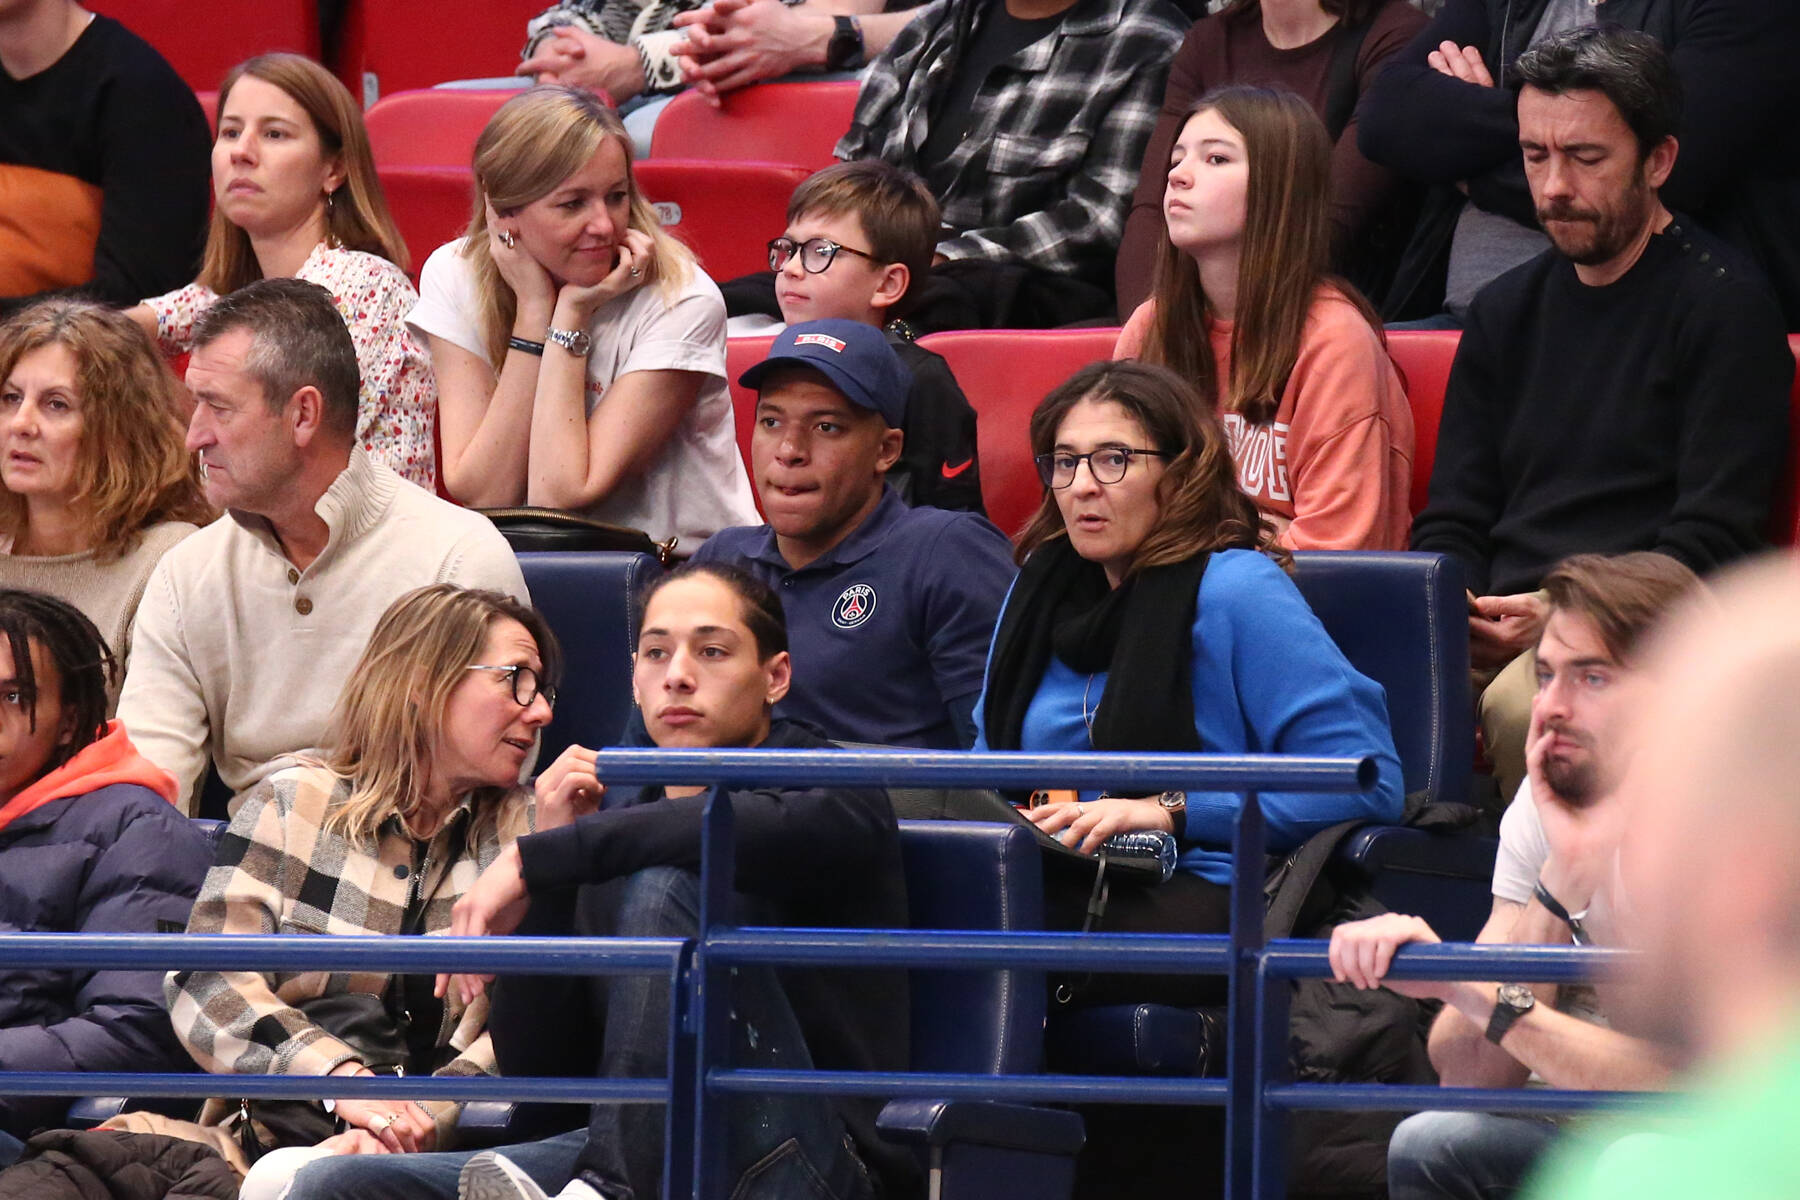 Kylian Mbappe pictured (center, wearing a baseball cap) watching a handball game between PSG and Nantes alongside his mother Fayza Lamari in March 2022